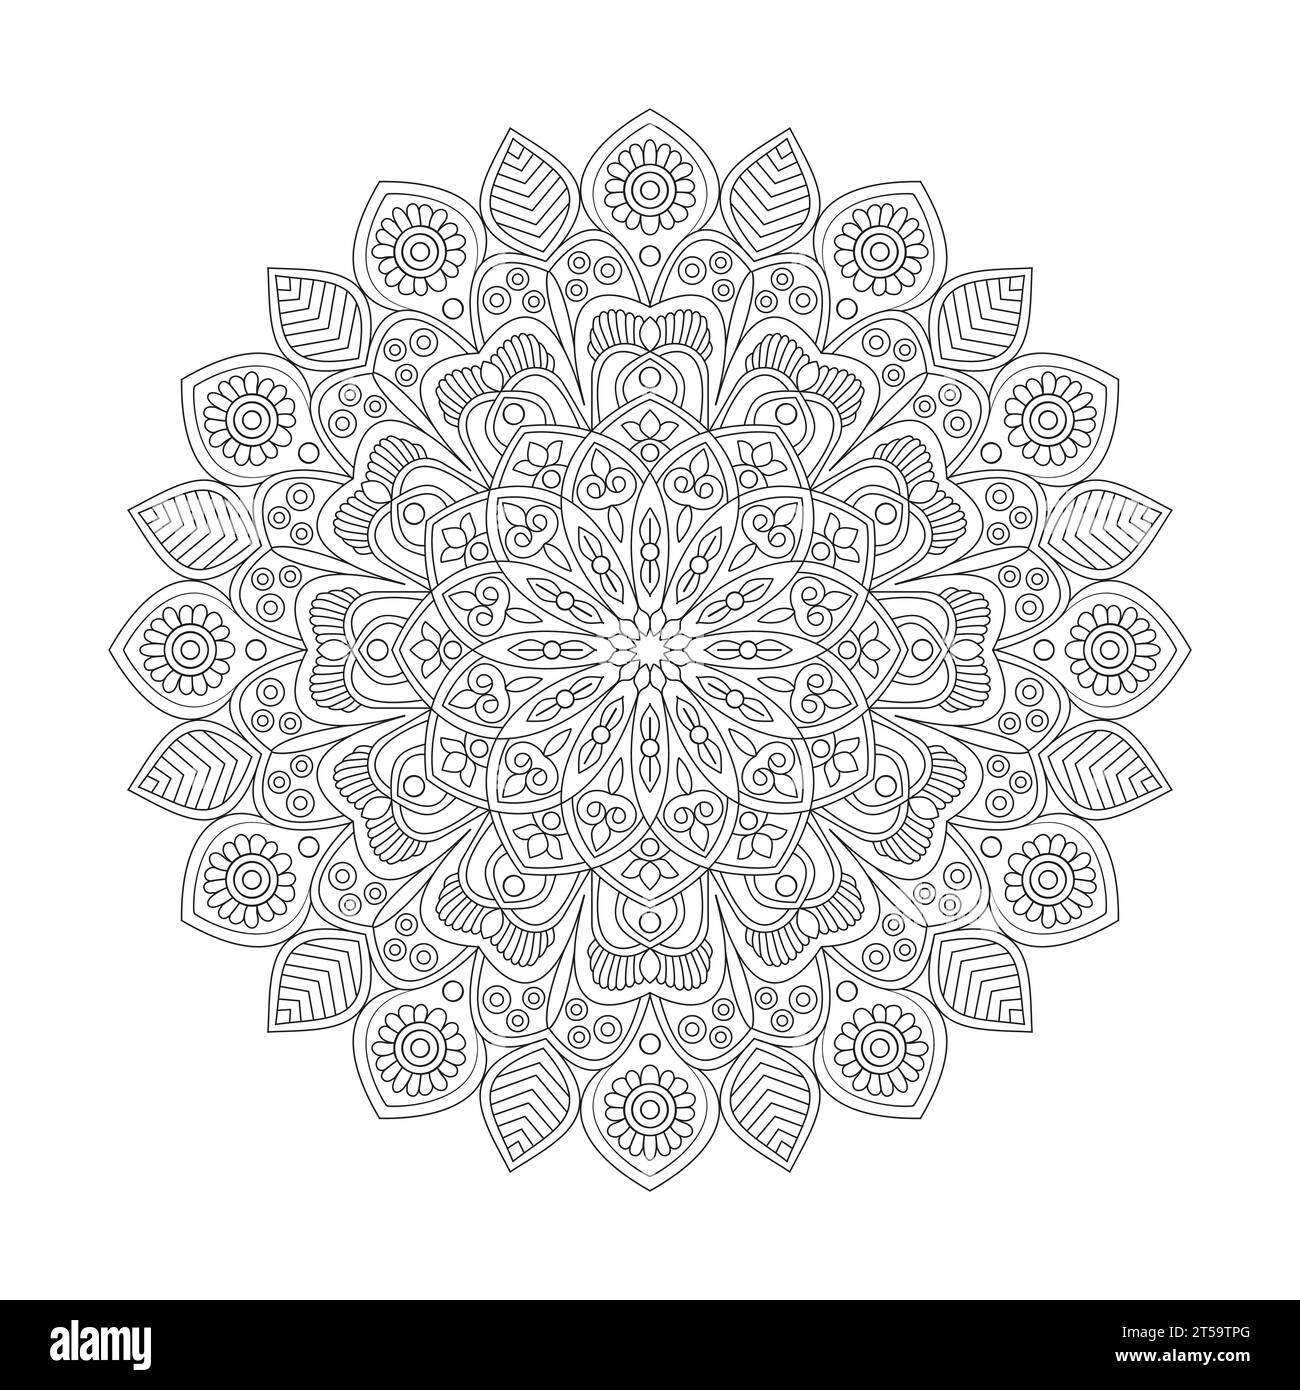 Adult Starry Night colouring book mandala page for KDP book interior. Peaceful Petals, Ability to Relax, Brain Experiences, Harmonious Haven, Peaceful Stock Vector